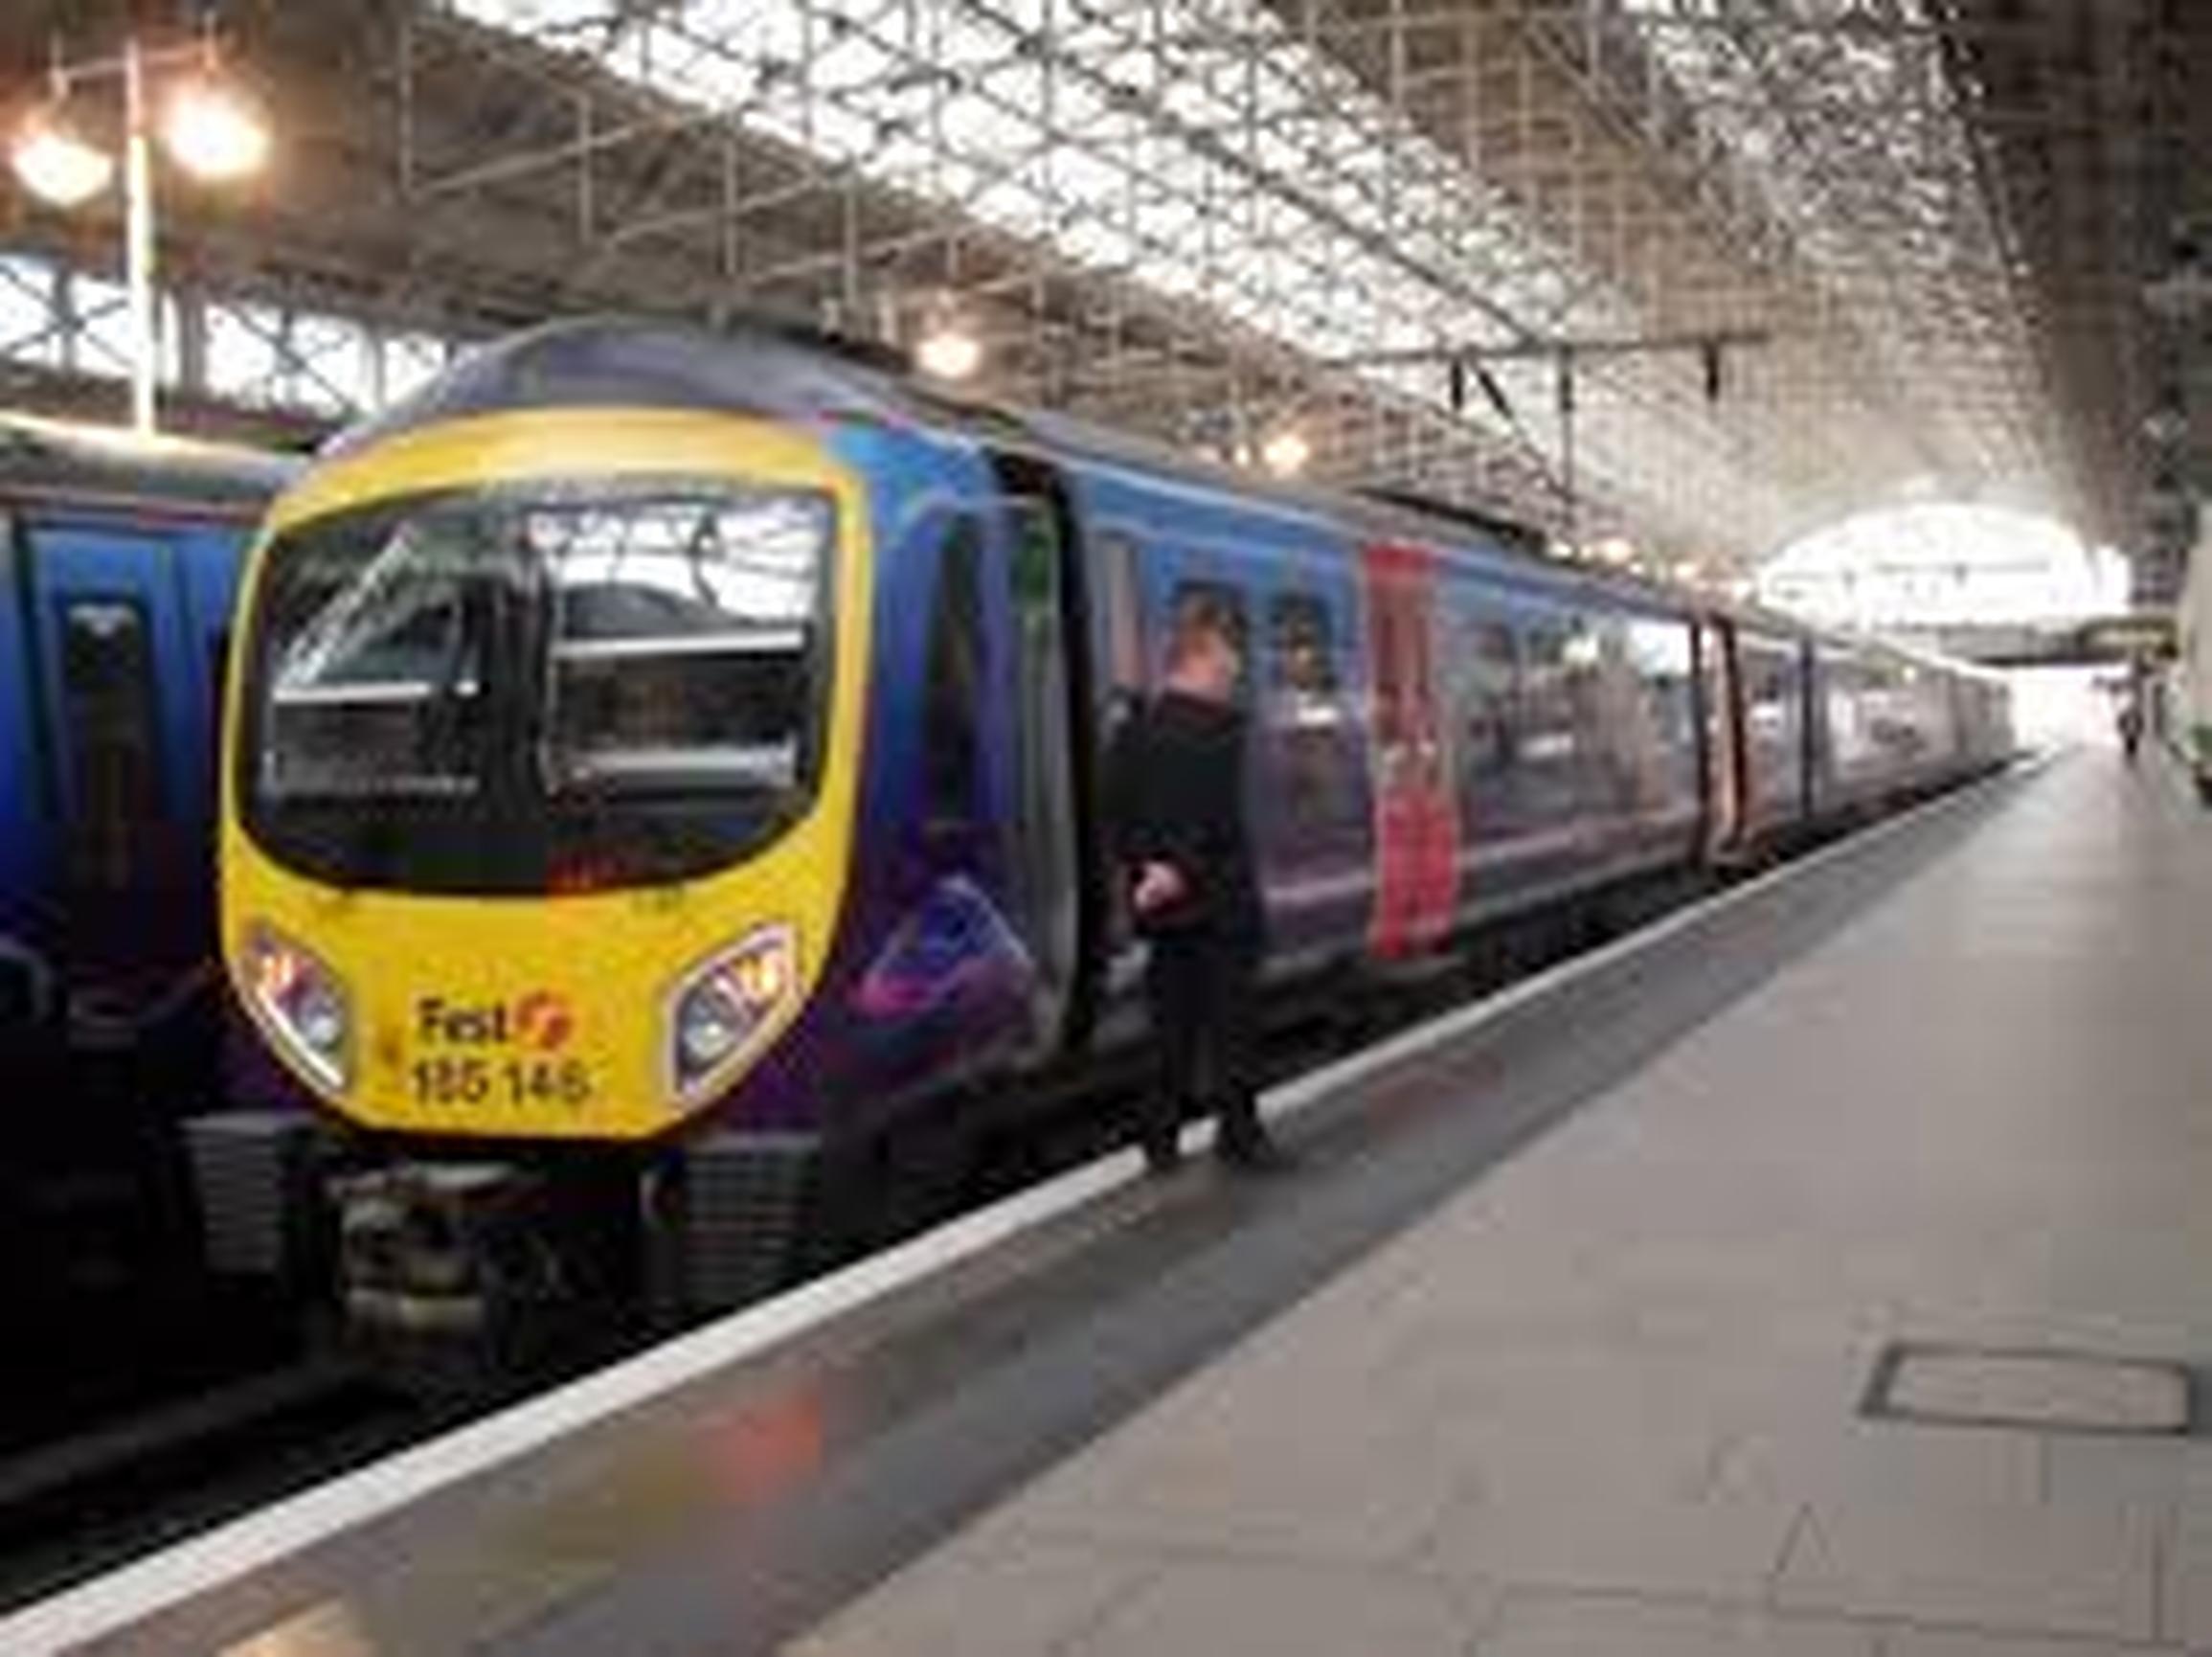 The local authorities could take control of rail franchises - but with power comes responsibility, one local politician says